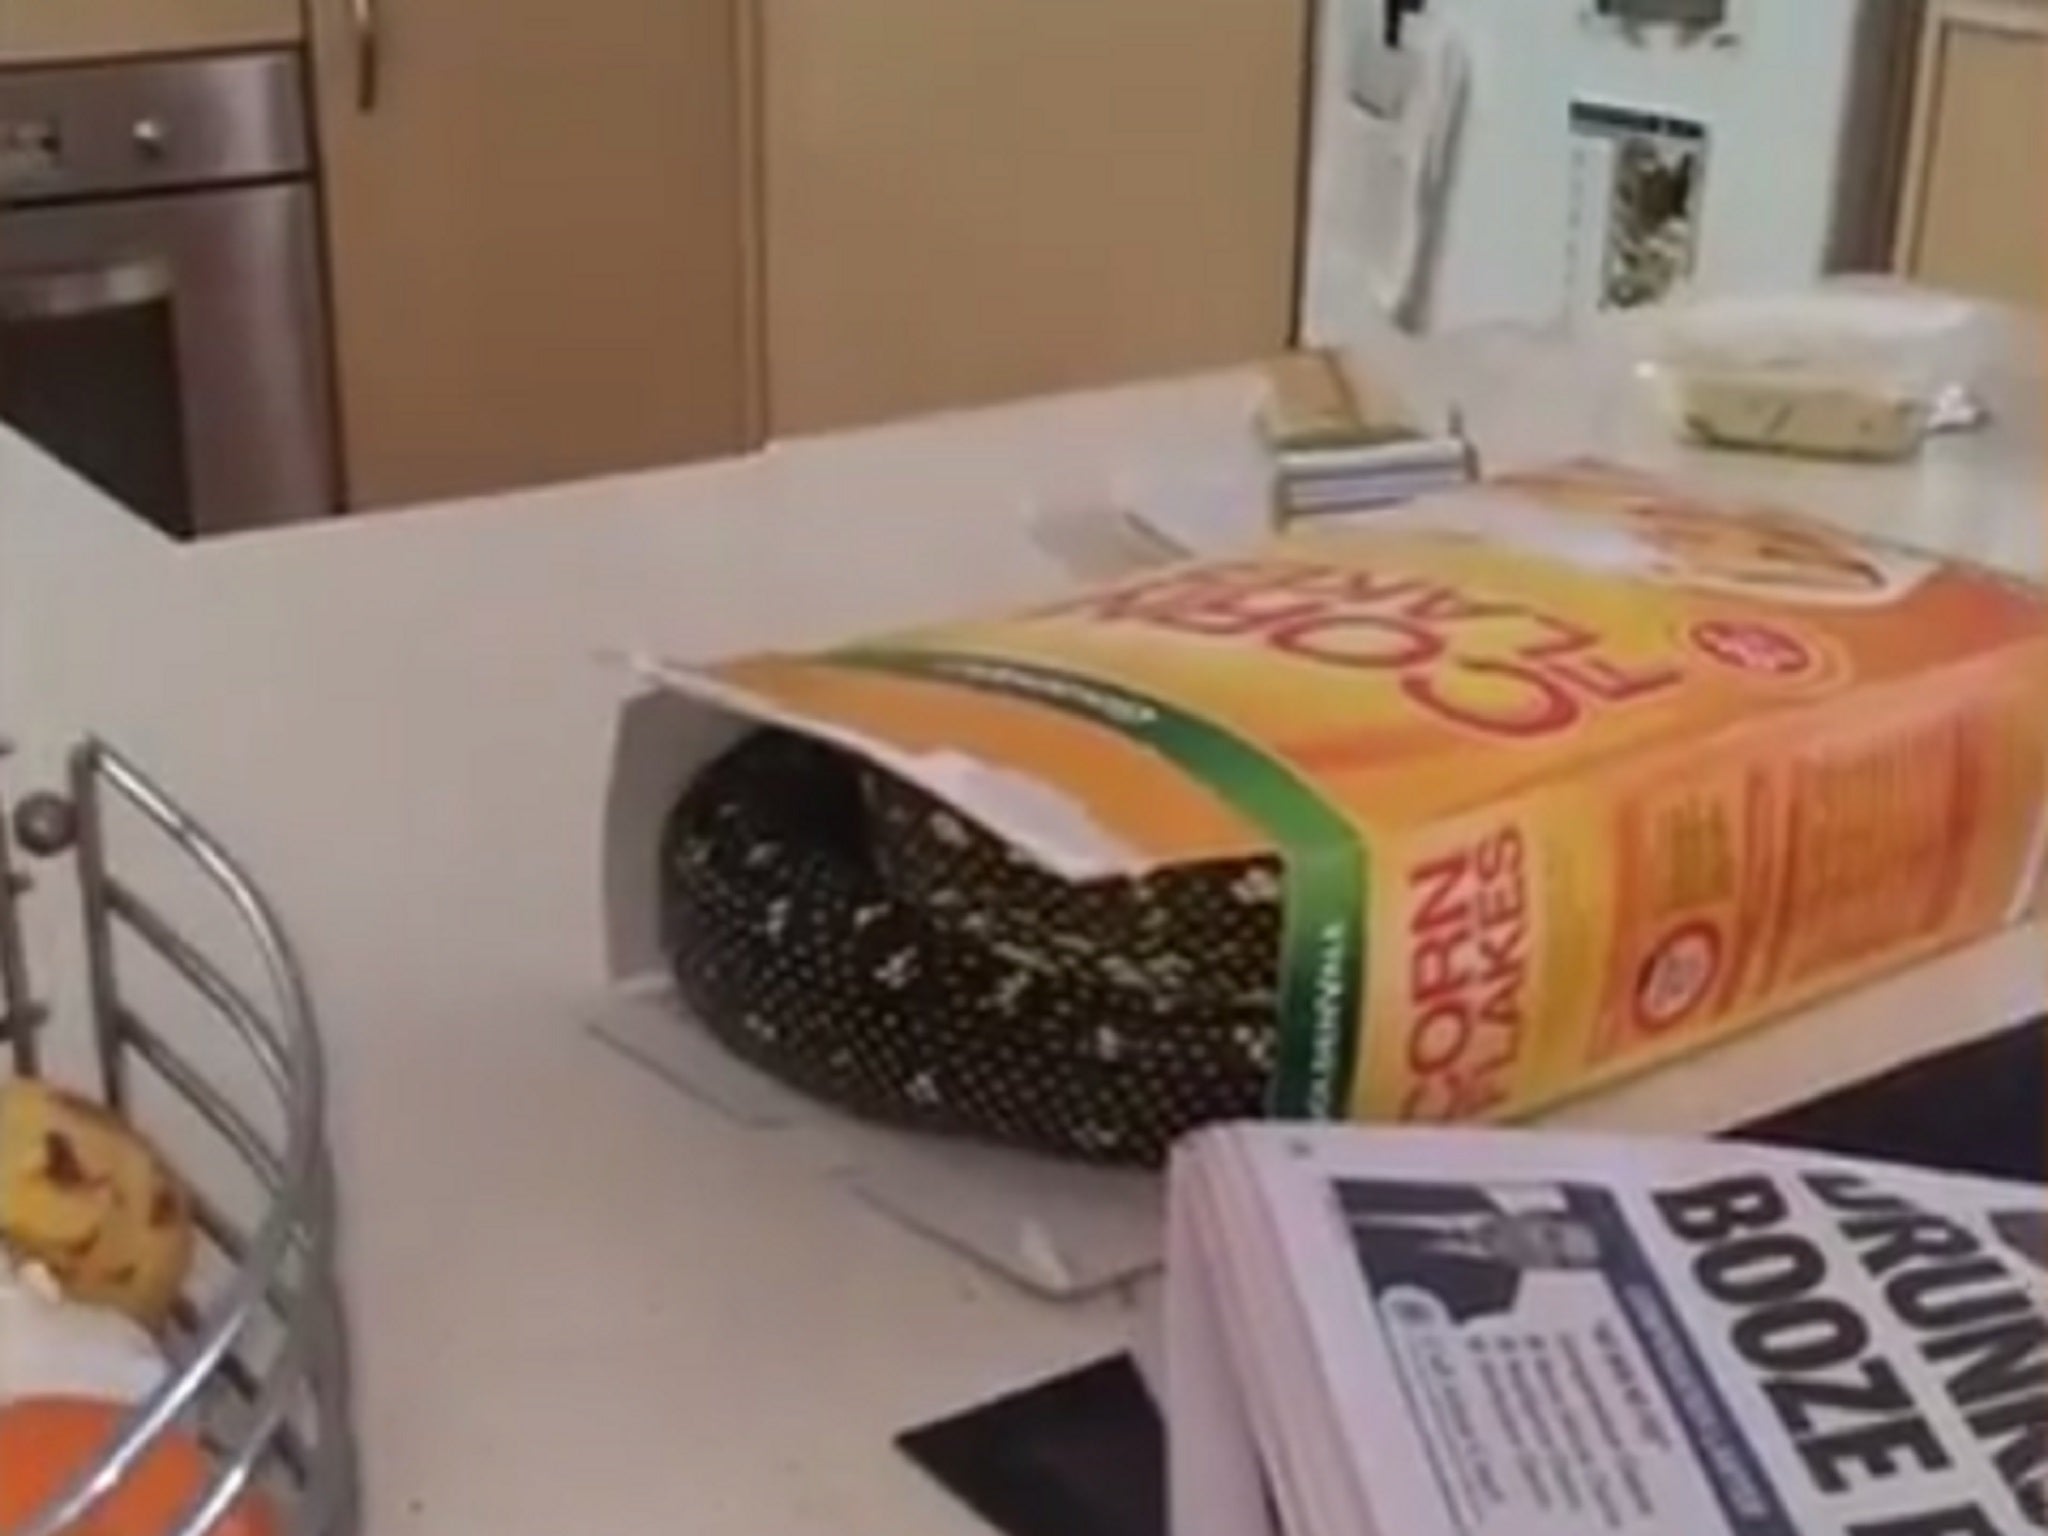 The snake that caused a man to flee his kitchen in fright after being found coiled up and hiding in a cereal box